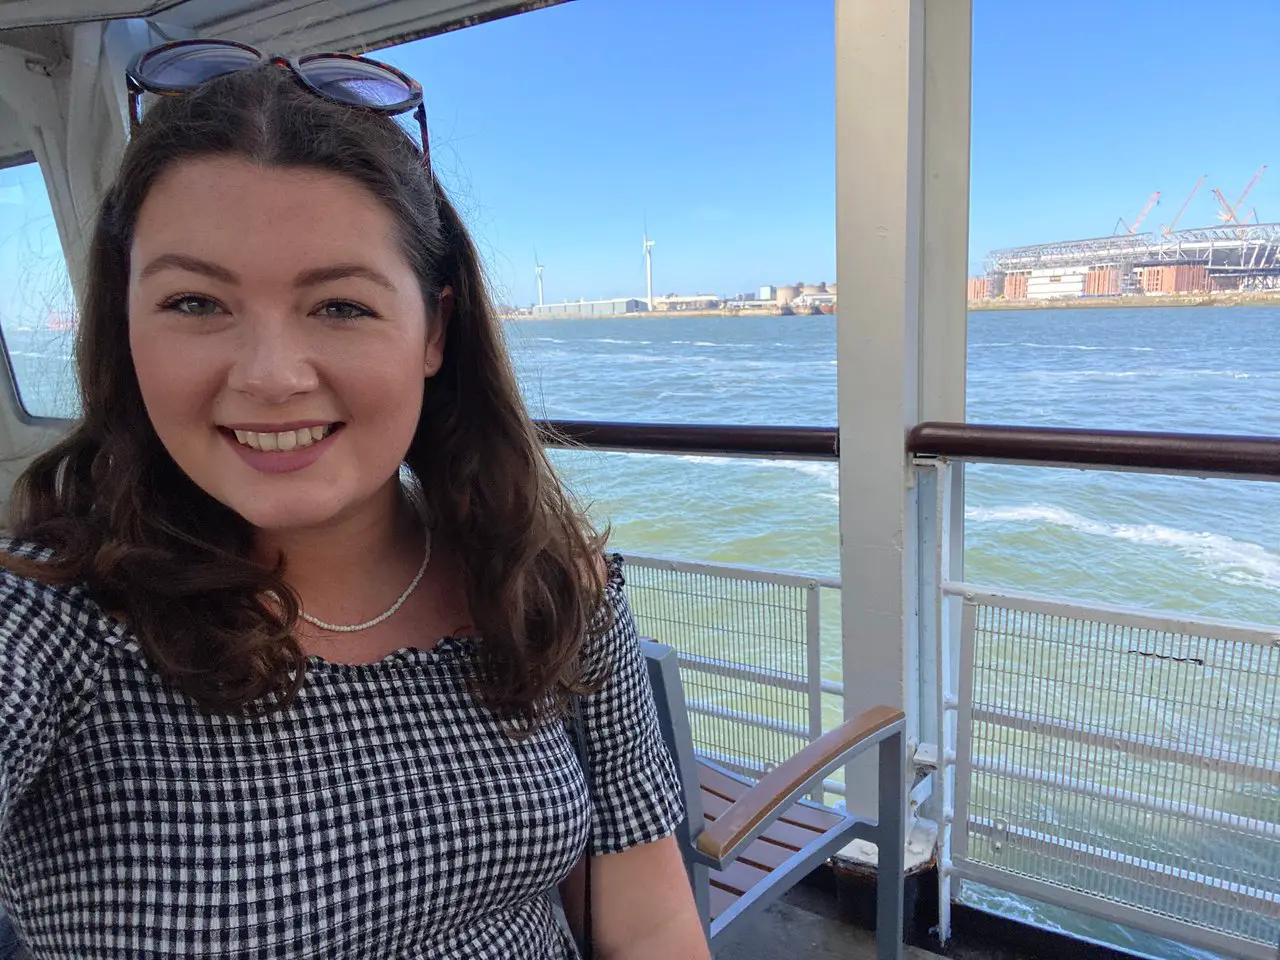 Ella on the Liverpool Mersey ferry with Liverpool in the background